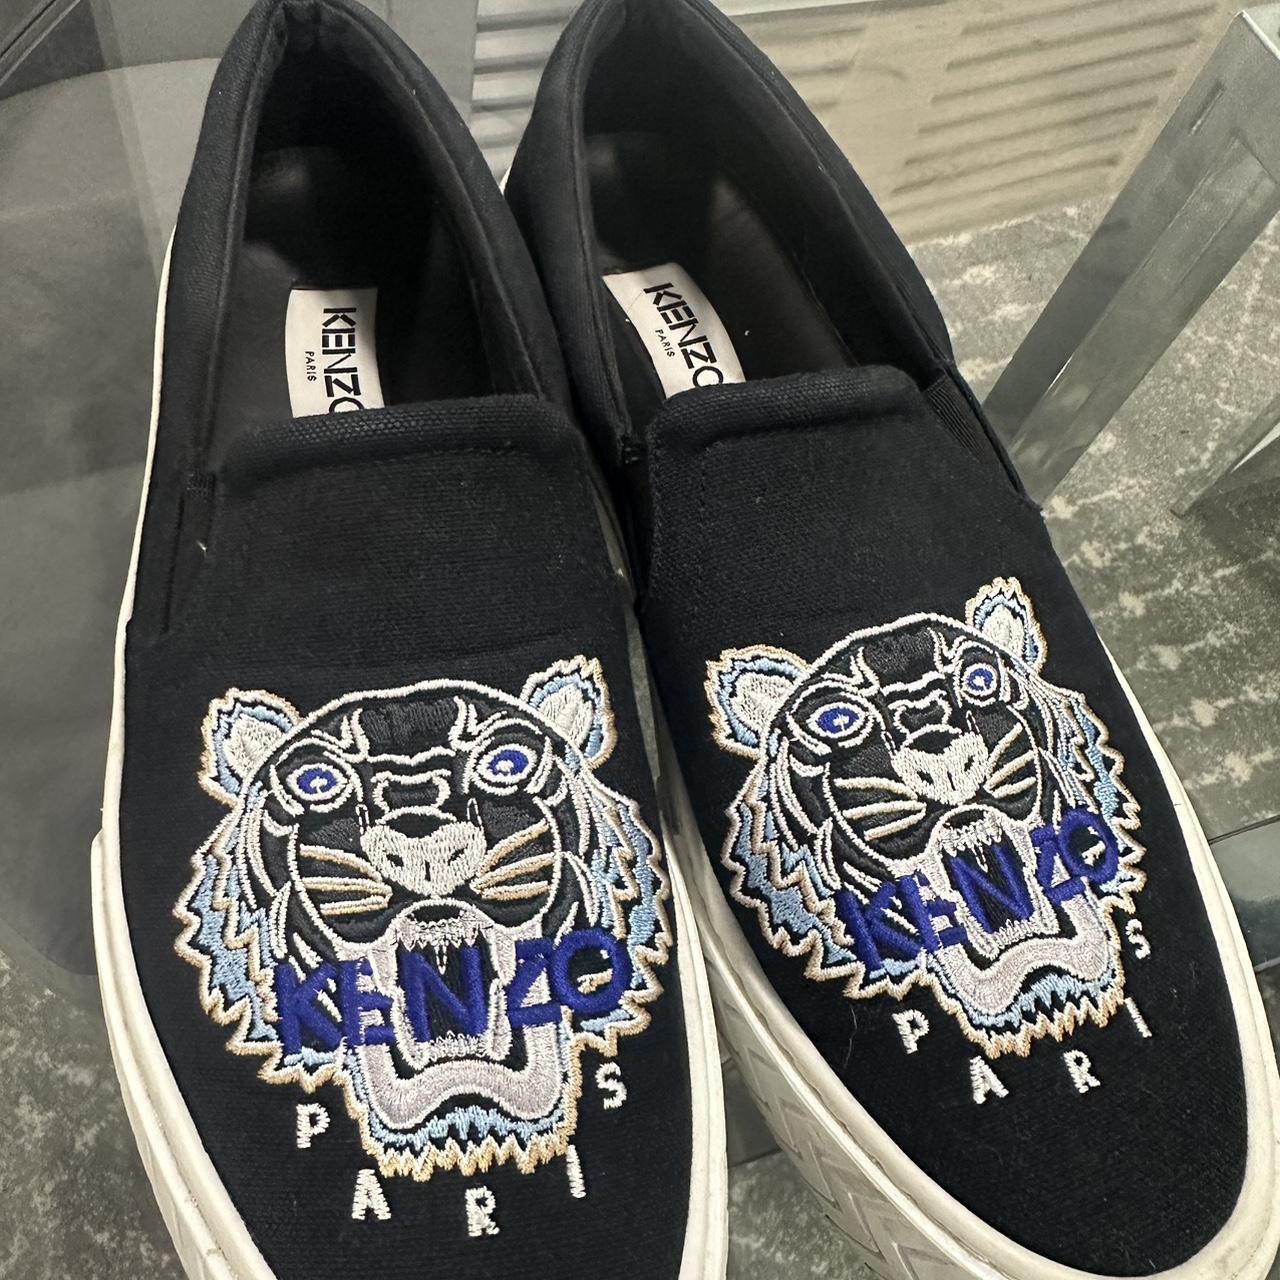 Kenzo mens sneakers. Worn couple of times only.... - Depop